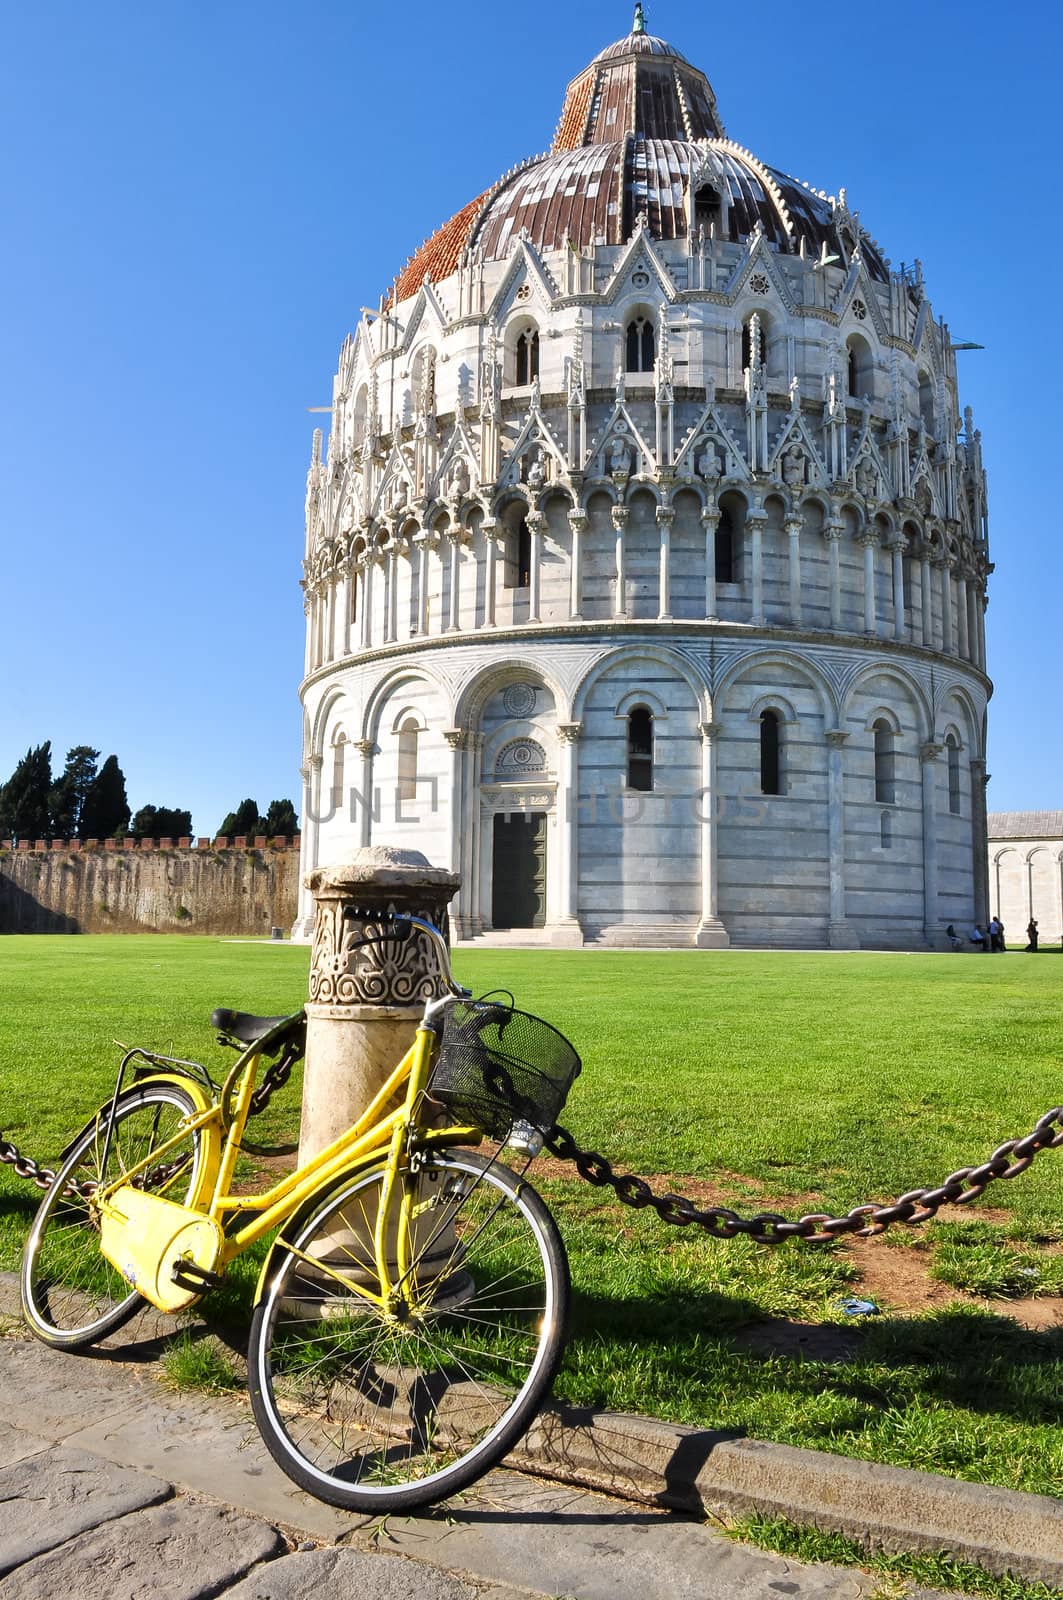 Baptistery of St. John in Pisa, Italy by martinm303